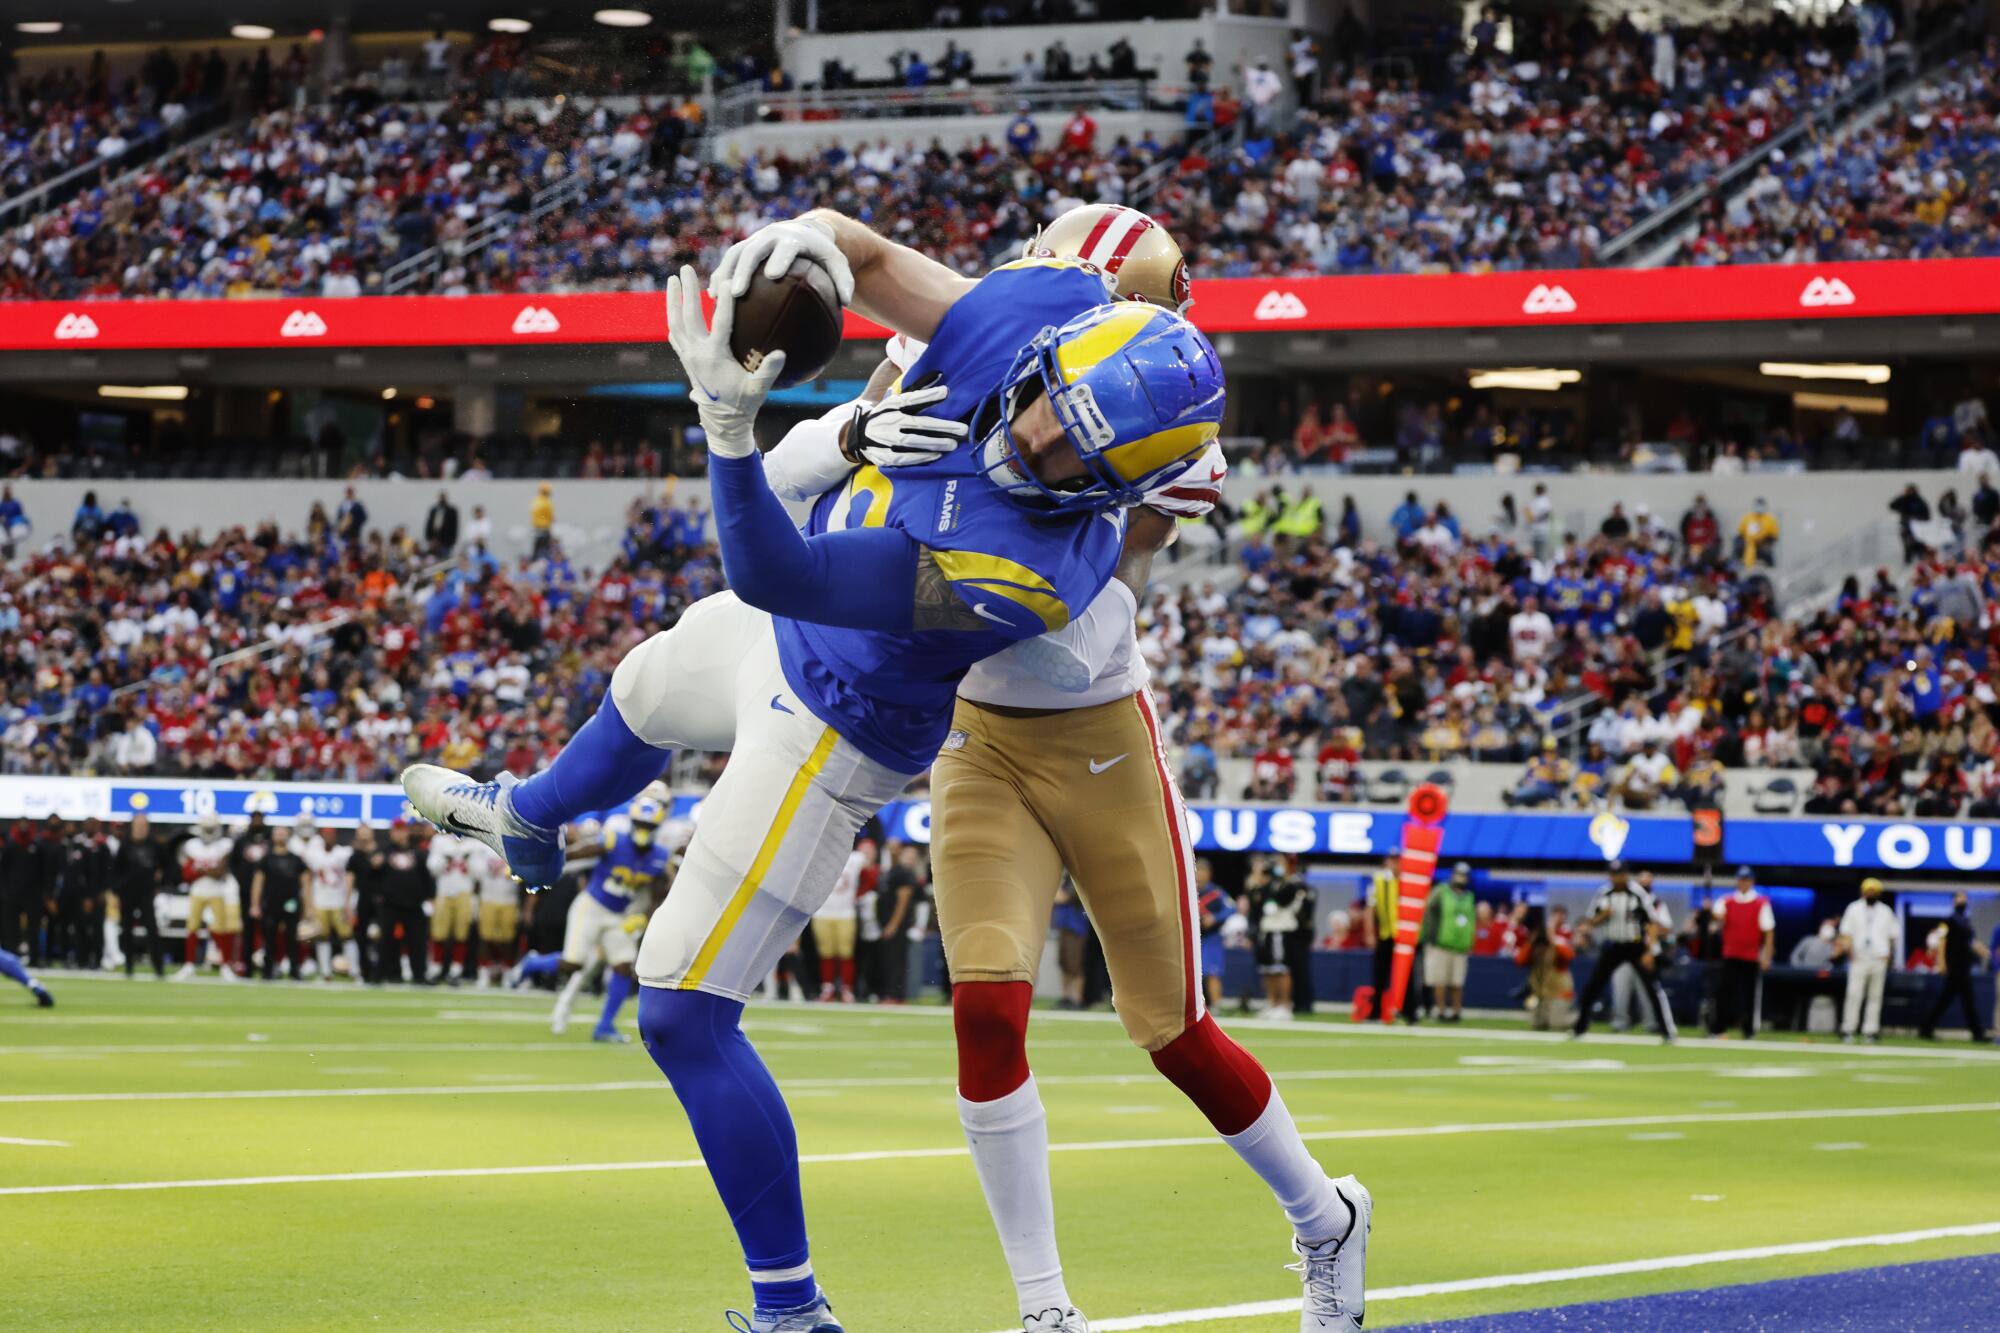 Rams tight end Tyler Higbee catches a touchdown pass in front of San Francisco 49ers cornerback Ambry Thomas.